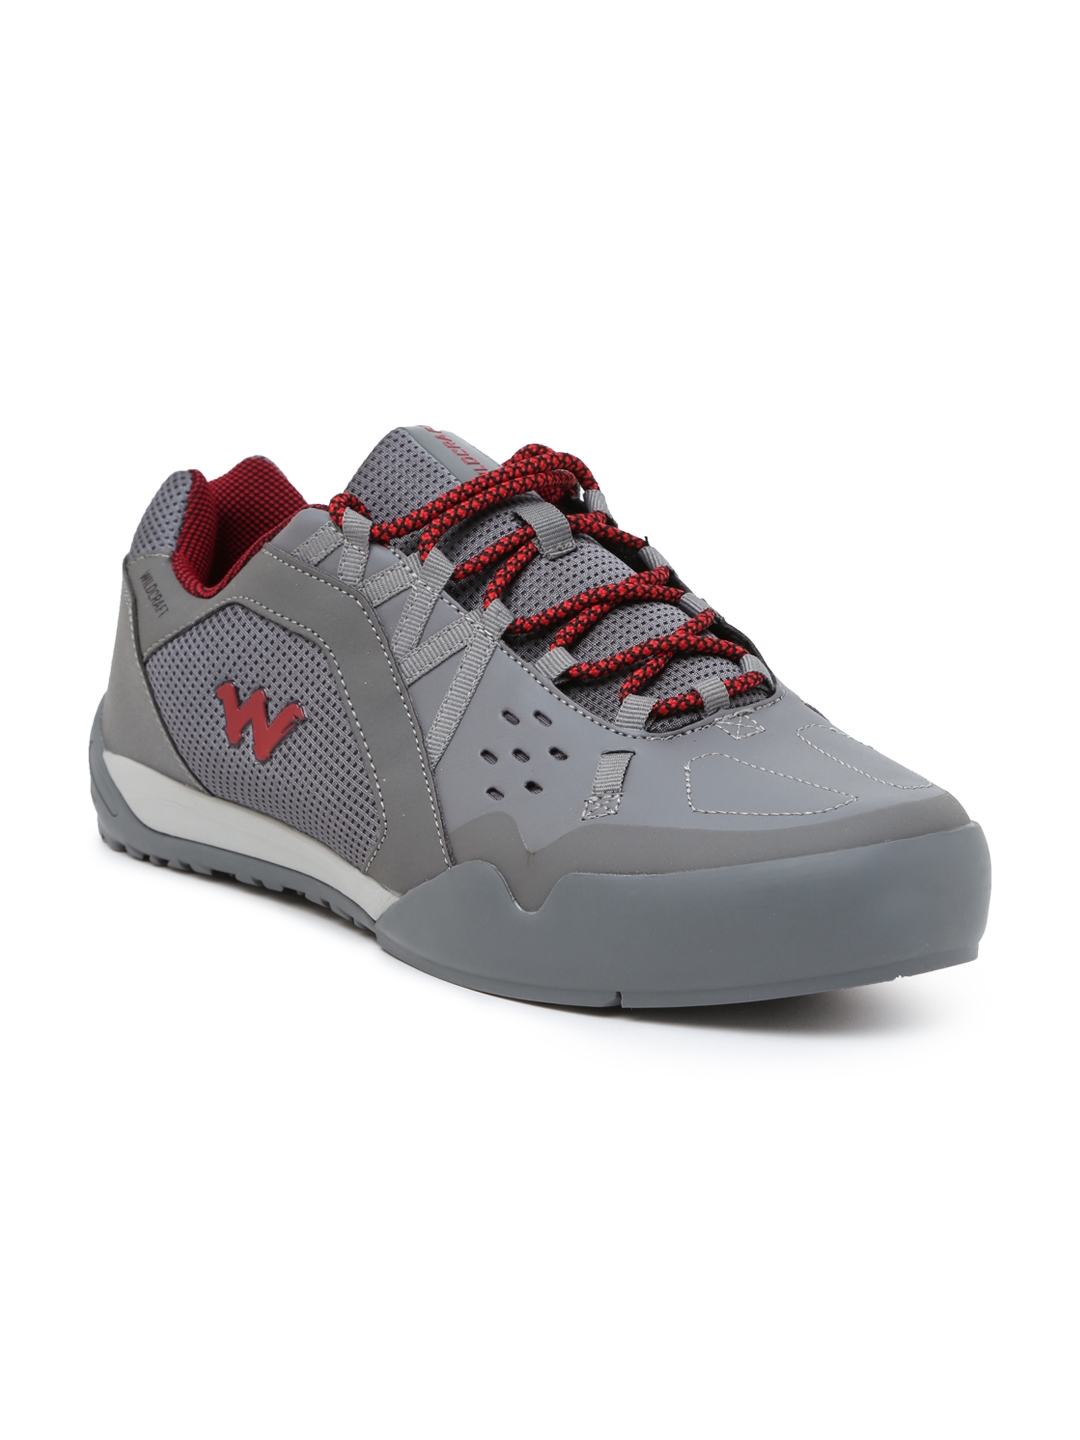 wildcraft casual shoes